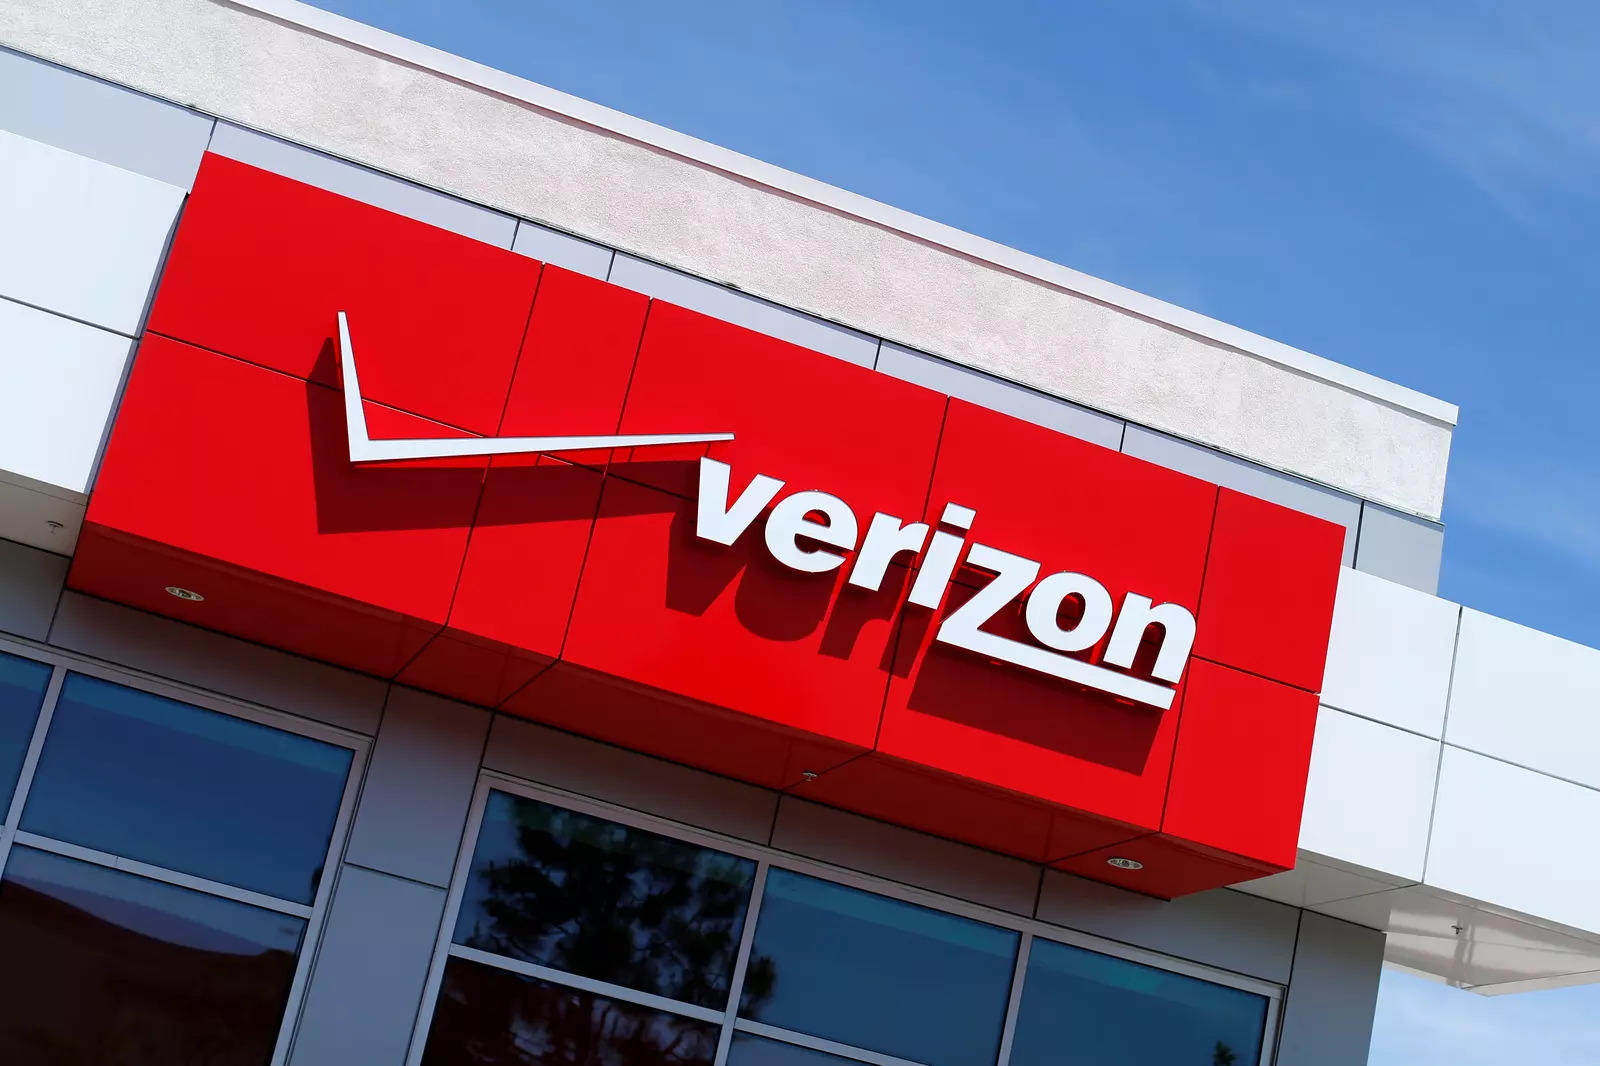 Verizon, Unity join hands to create new gaming experiences